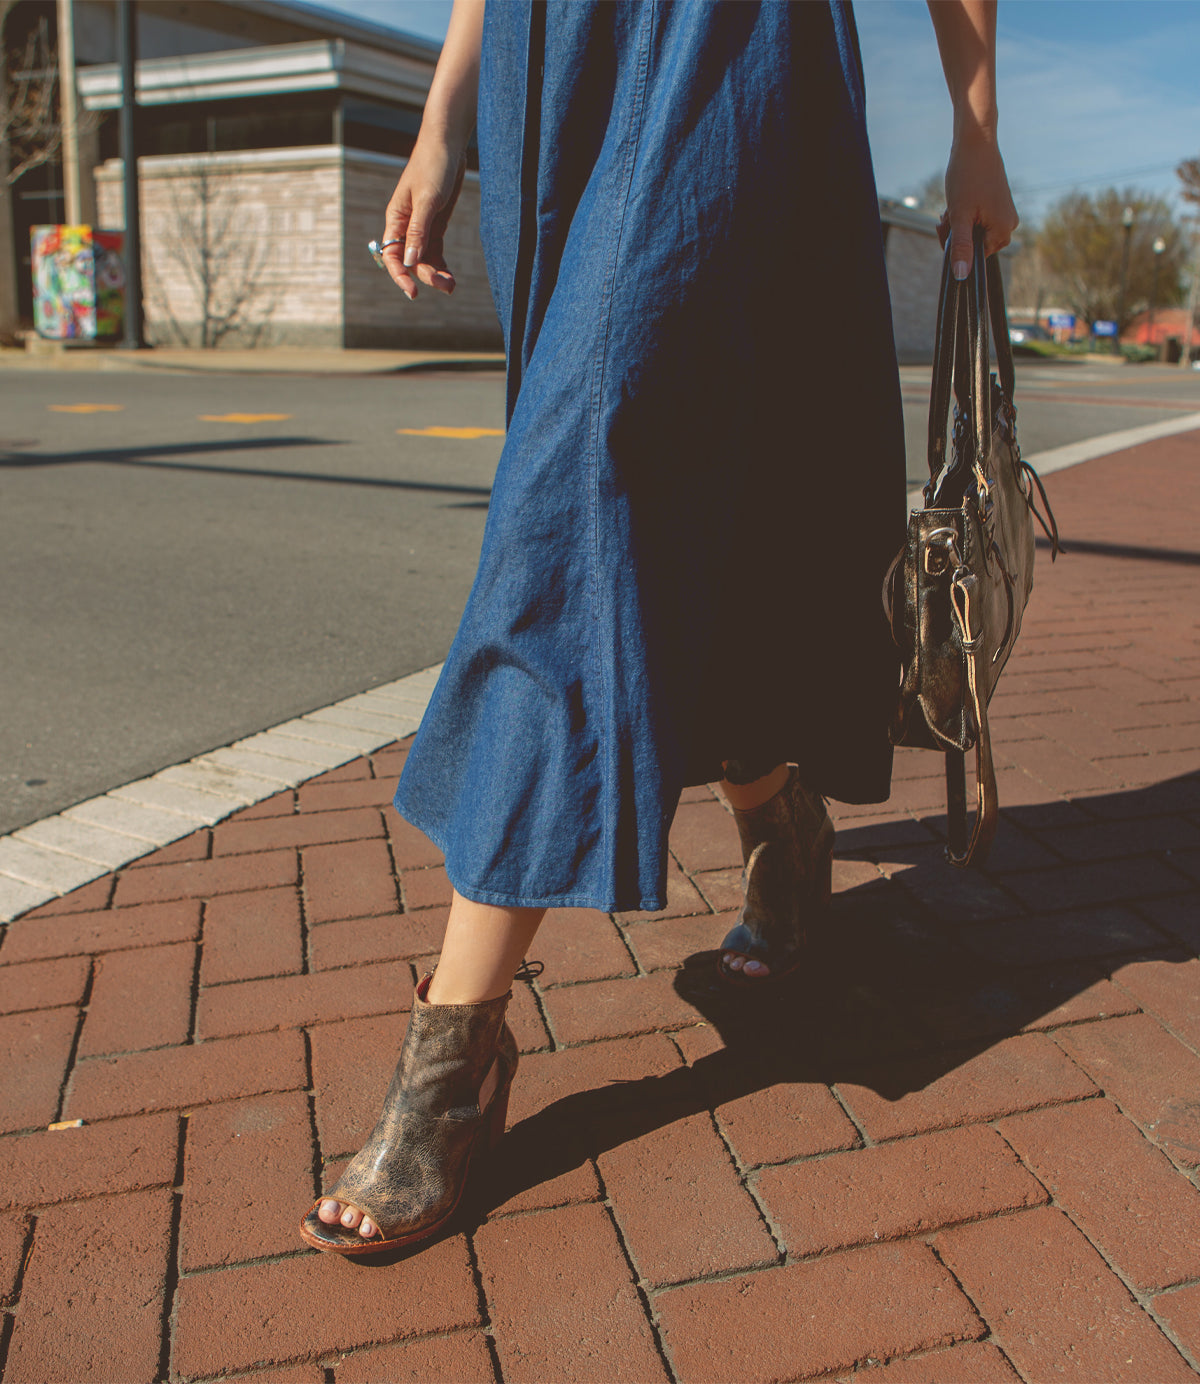 A person wearing a blue dress and Bed Stu Angelique II ankle boots with back lacing, carrying a handbag while walking across a brick-paved area.